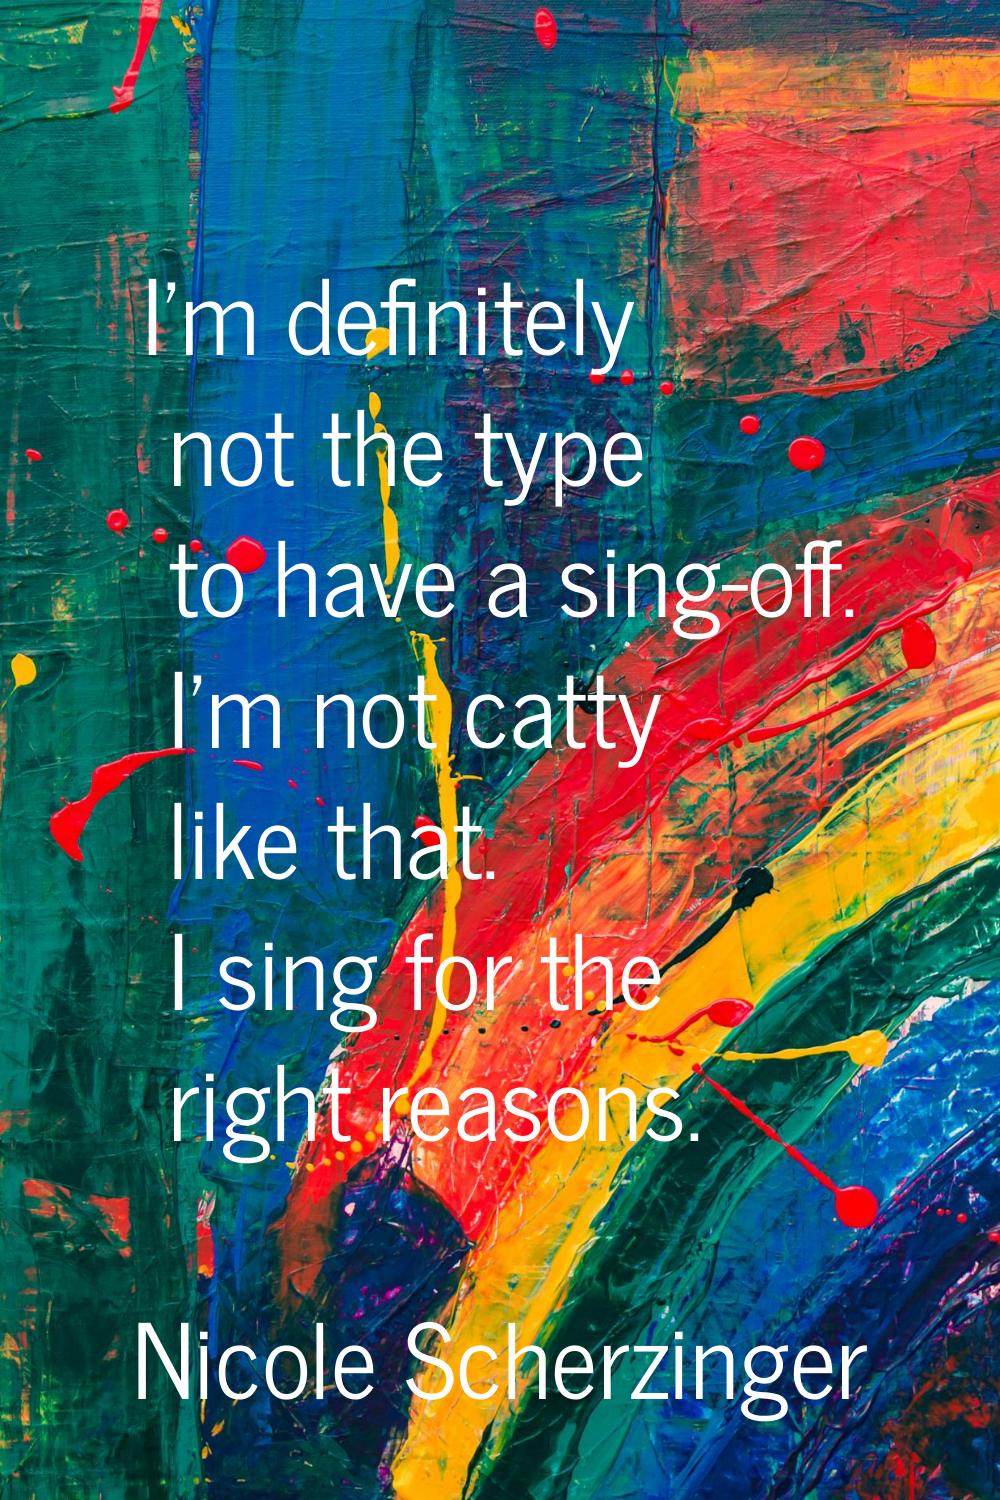 I'm definitely not the type to have a sing-off. I'm not catty like that. I sing for the right reaso